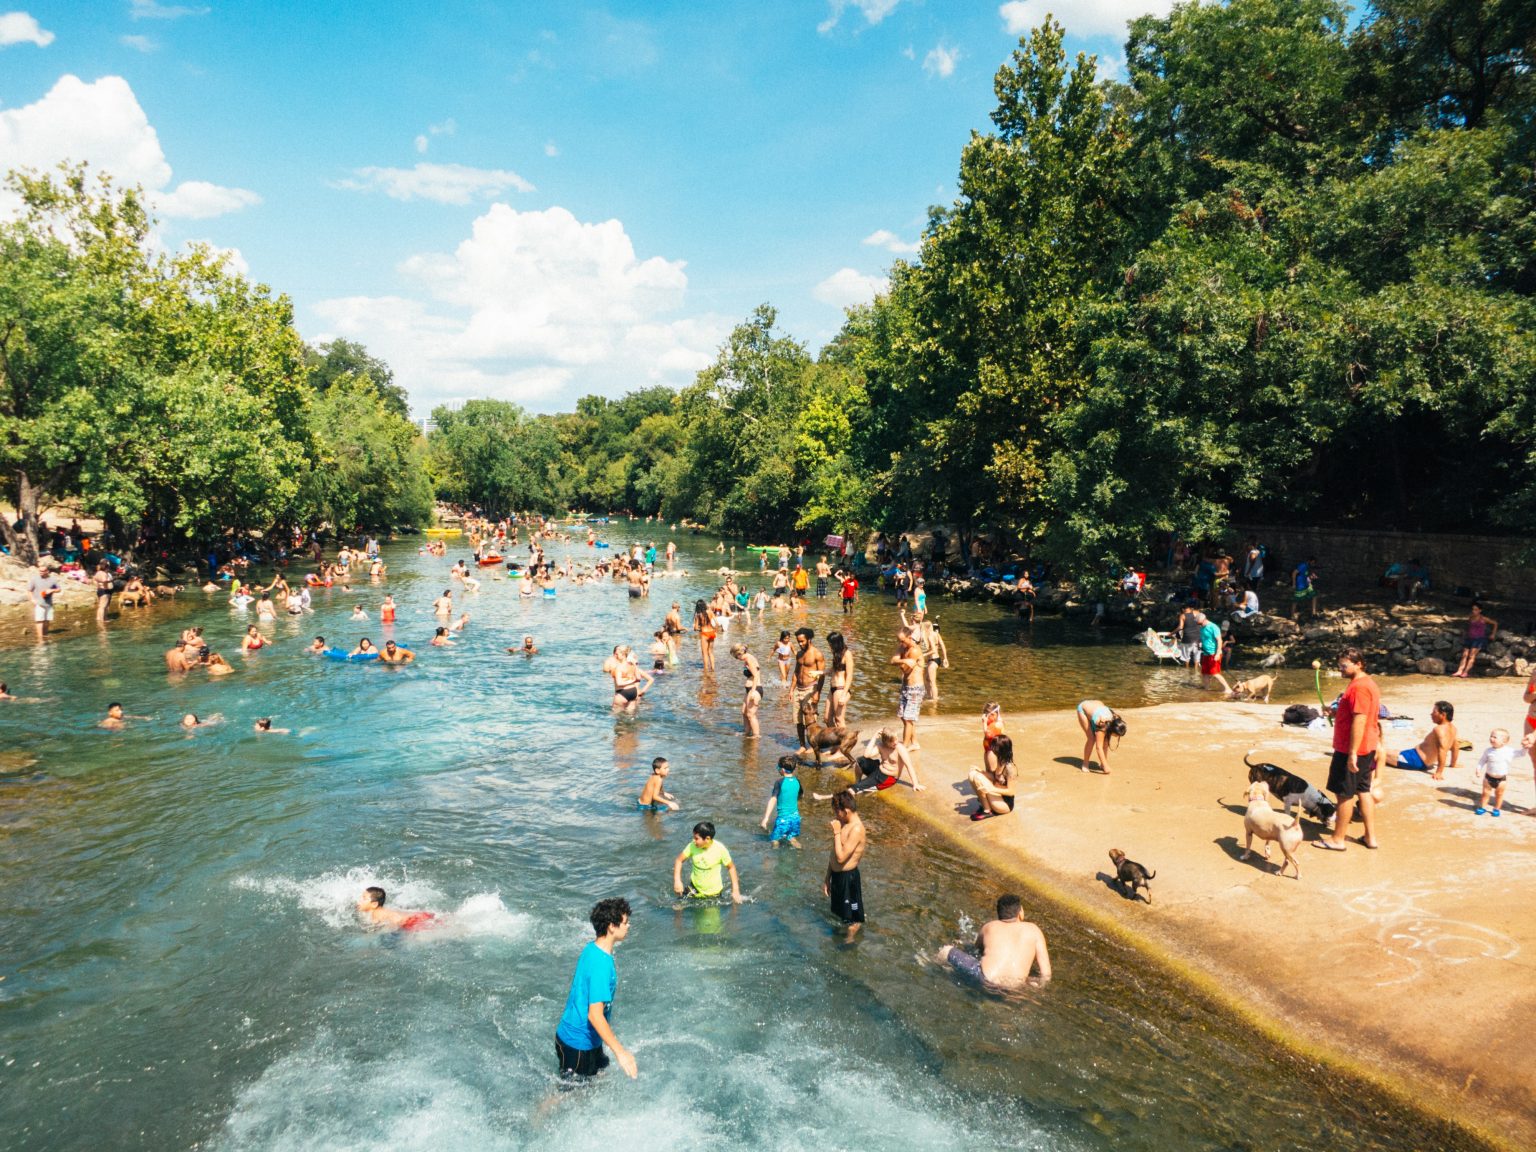 Barton Springs Pool reopens after nearly 3 months